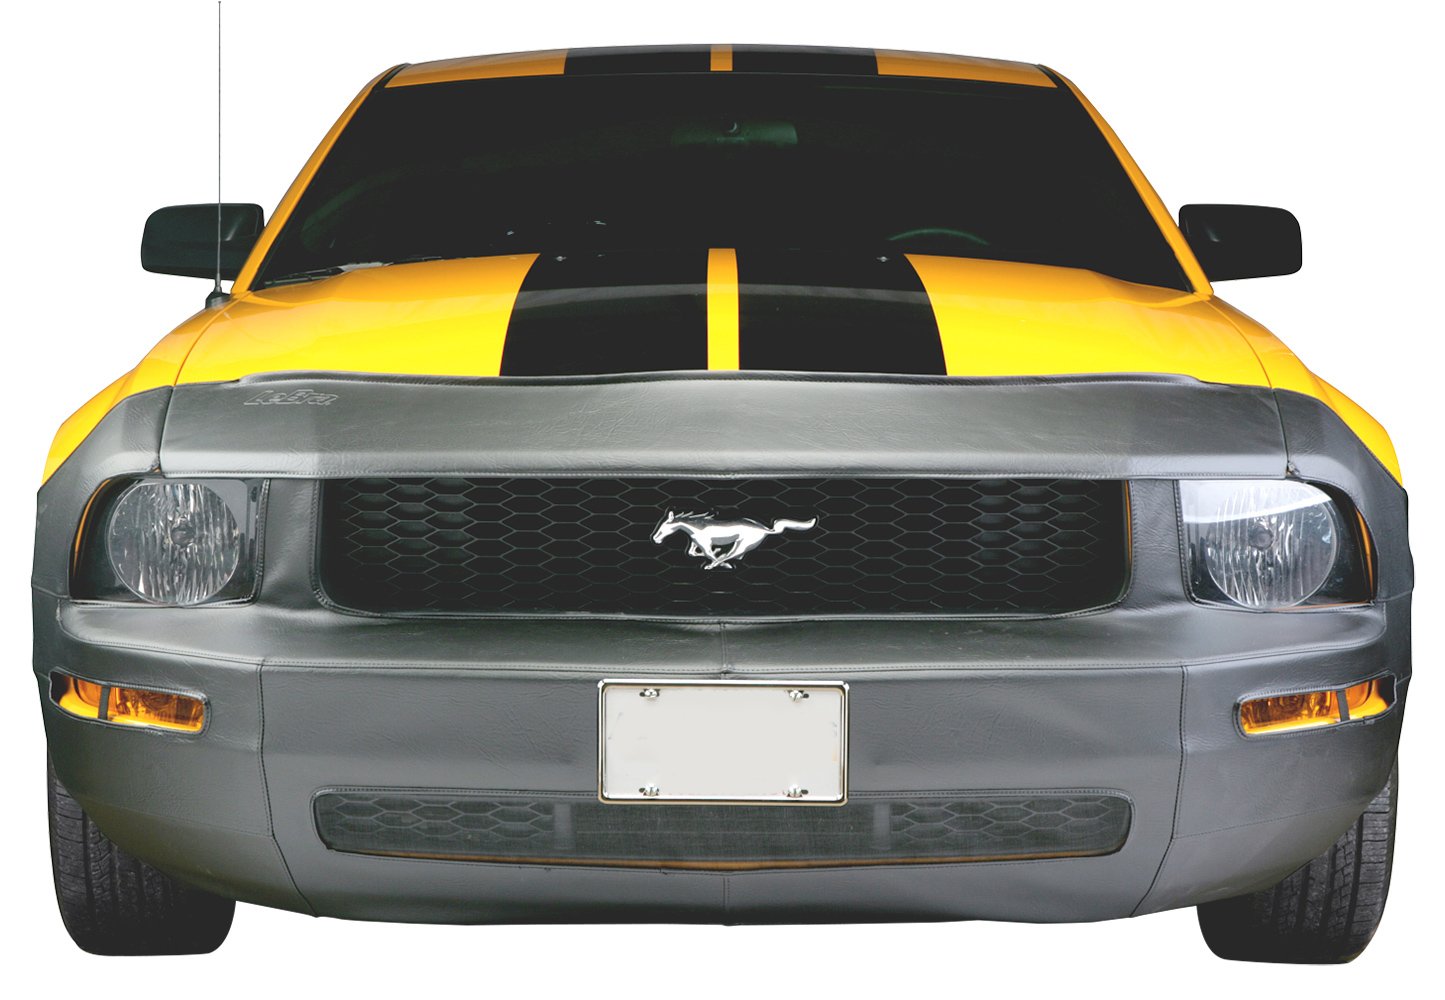 LeBra 551387-01 Each LeBra is specifically designed to your exact vehicle model Front End Bra LeBra Custom Front End Cover If your model has fog lights special air-intakes or even pop-up headlights there is a LeBra for you 